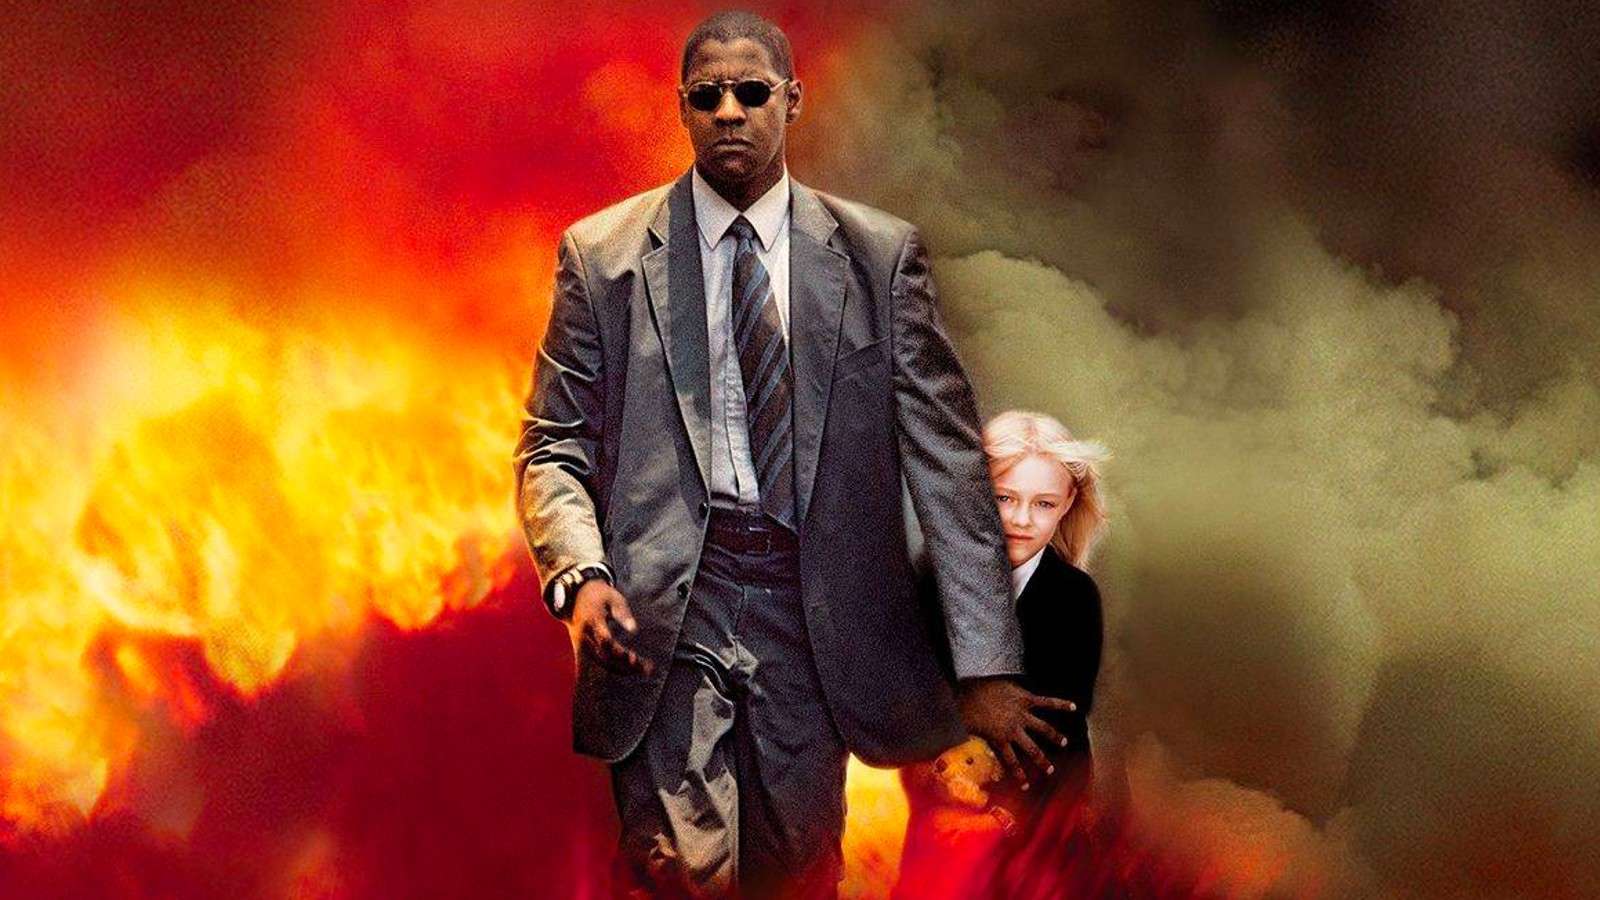 The poster for Man on Fire